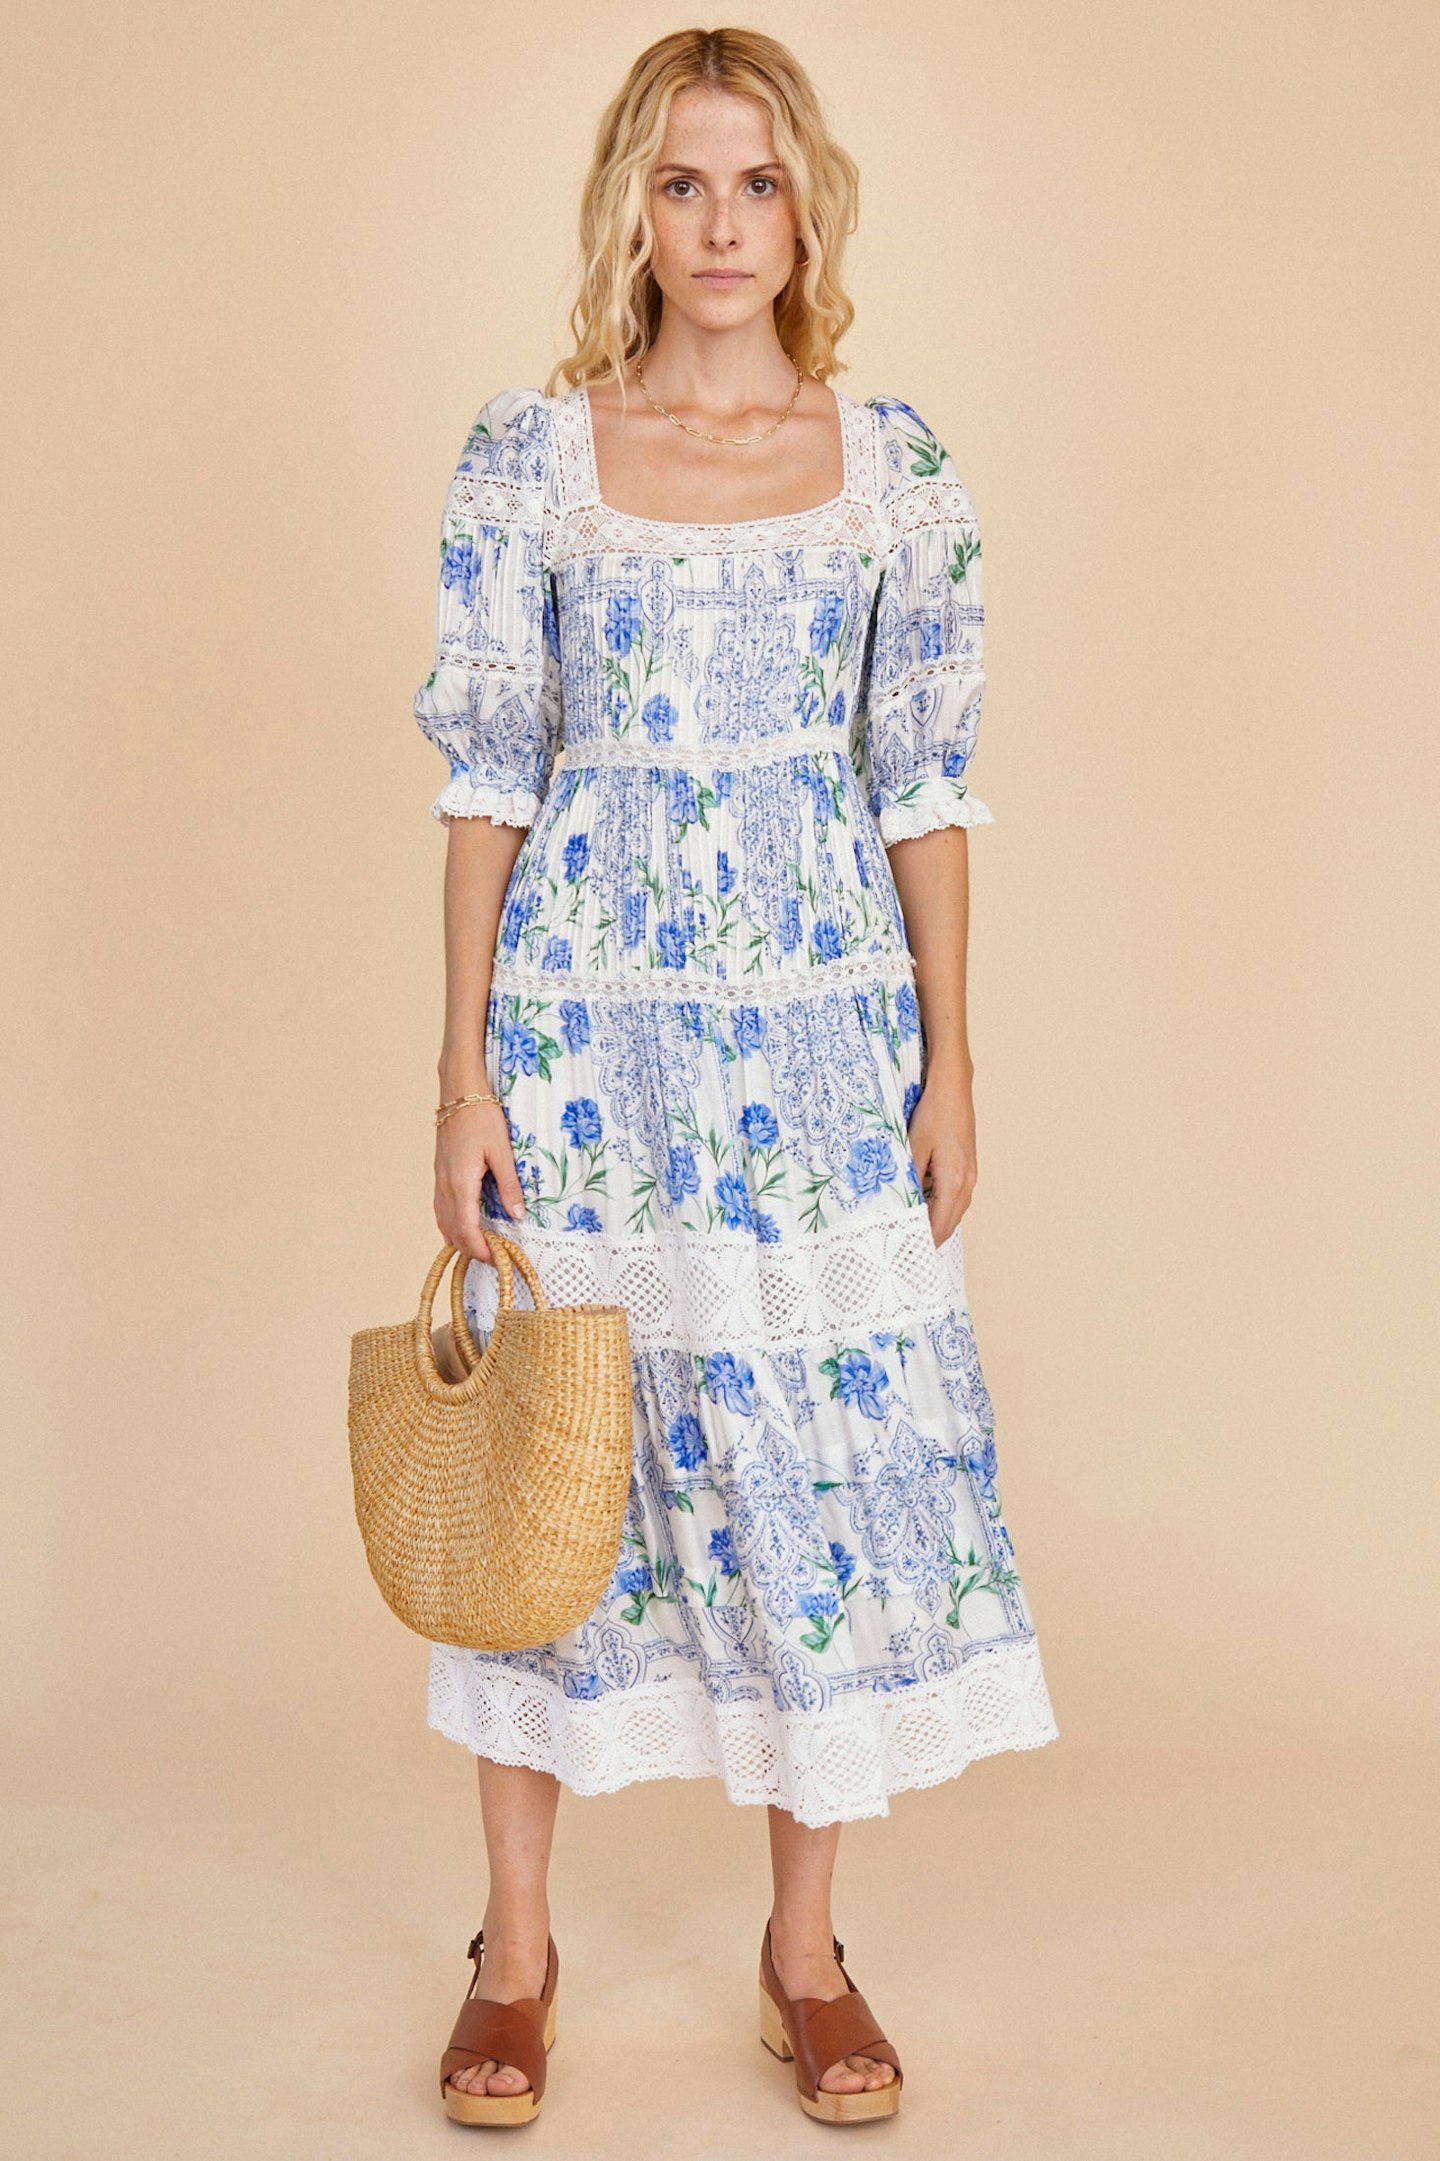 Hunter Bell NYC, Evelyn Floral Midi Dress, £381